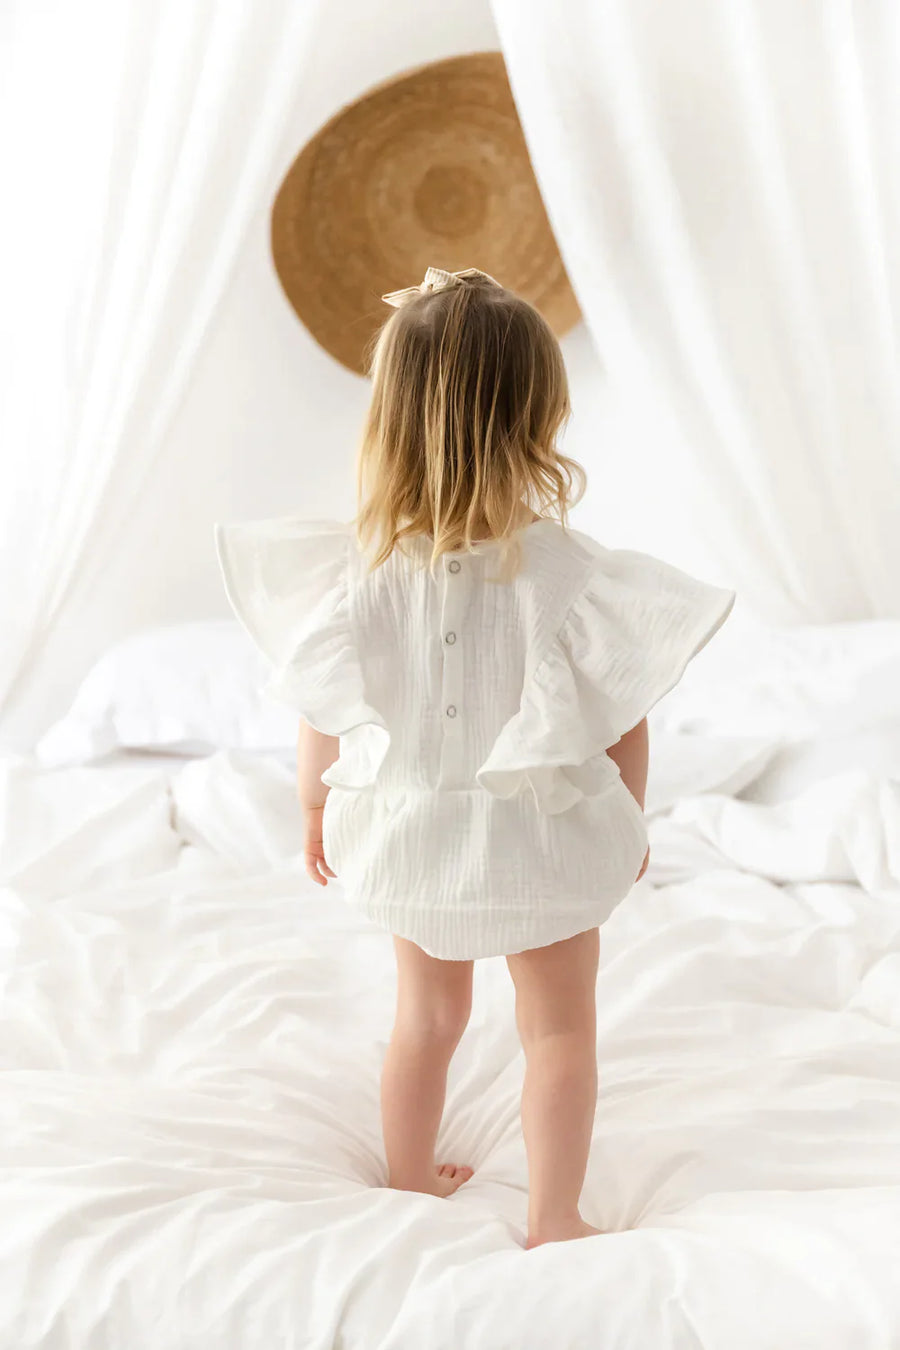 A Model Wearing Beige Pure Cotton Skyler Organic muslin romper
, curated by Only Ethikal